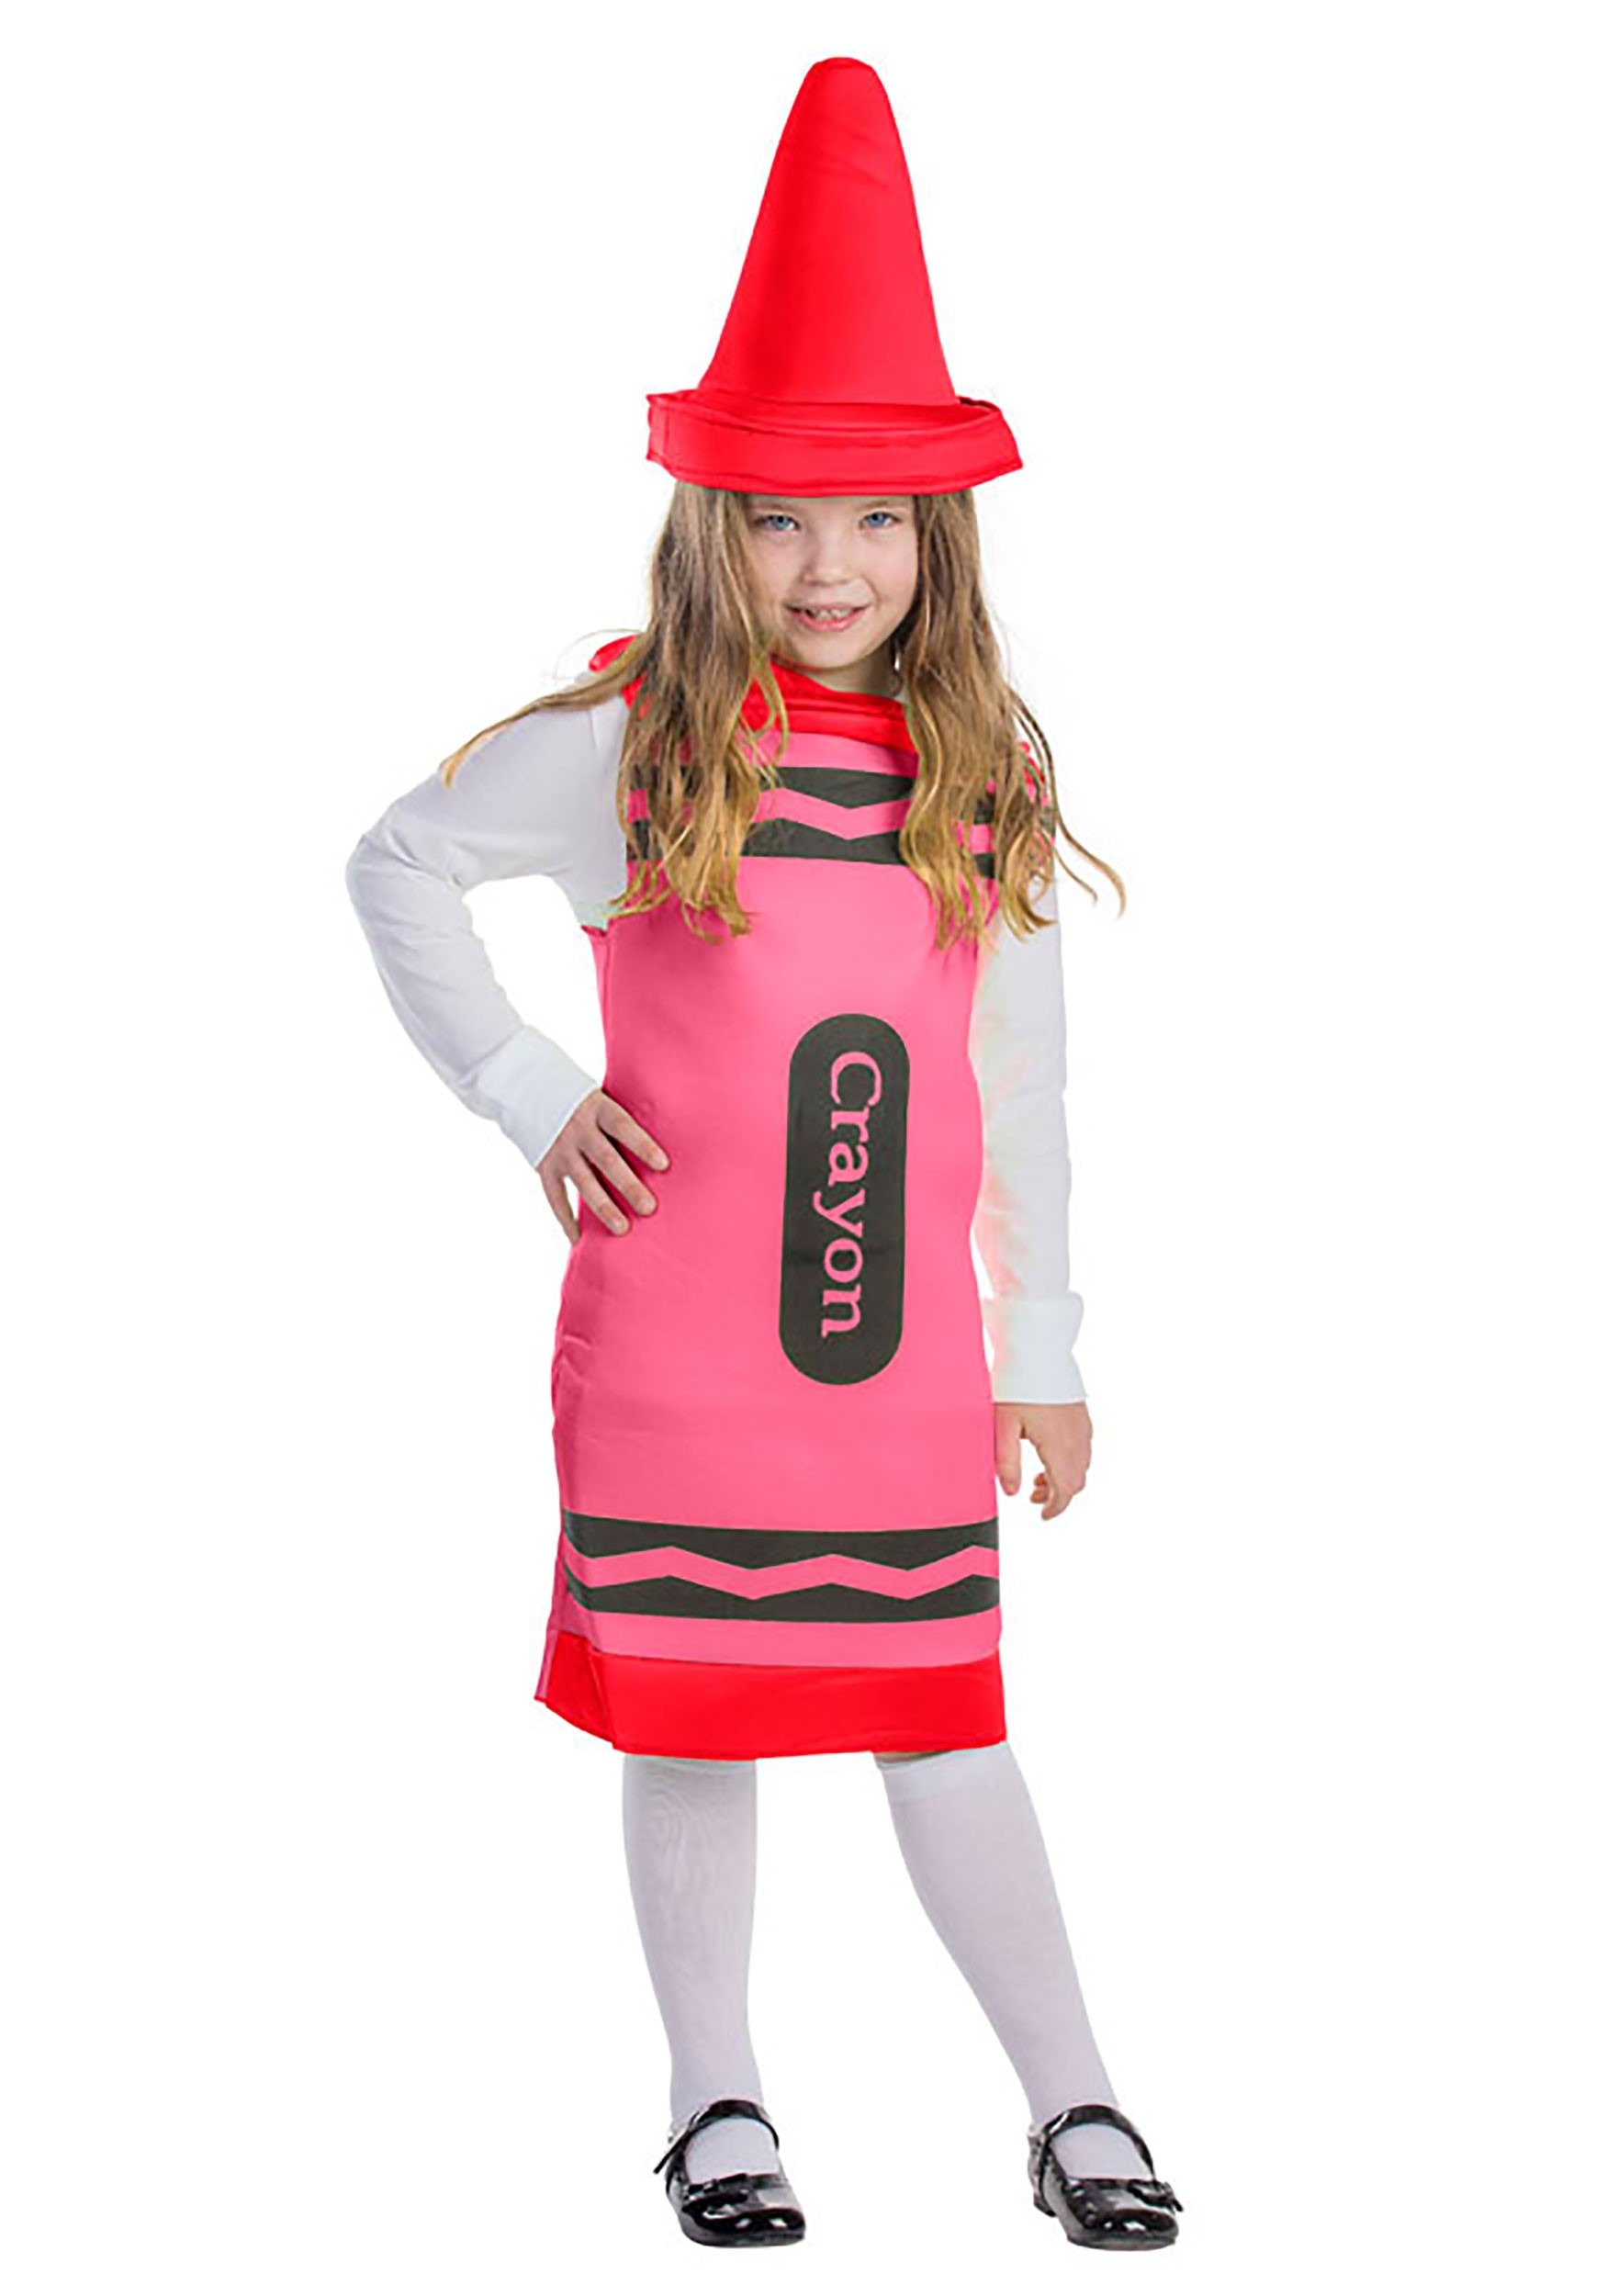 Toddler's Red Crayon Costume